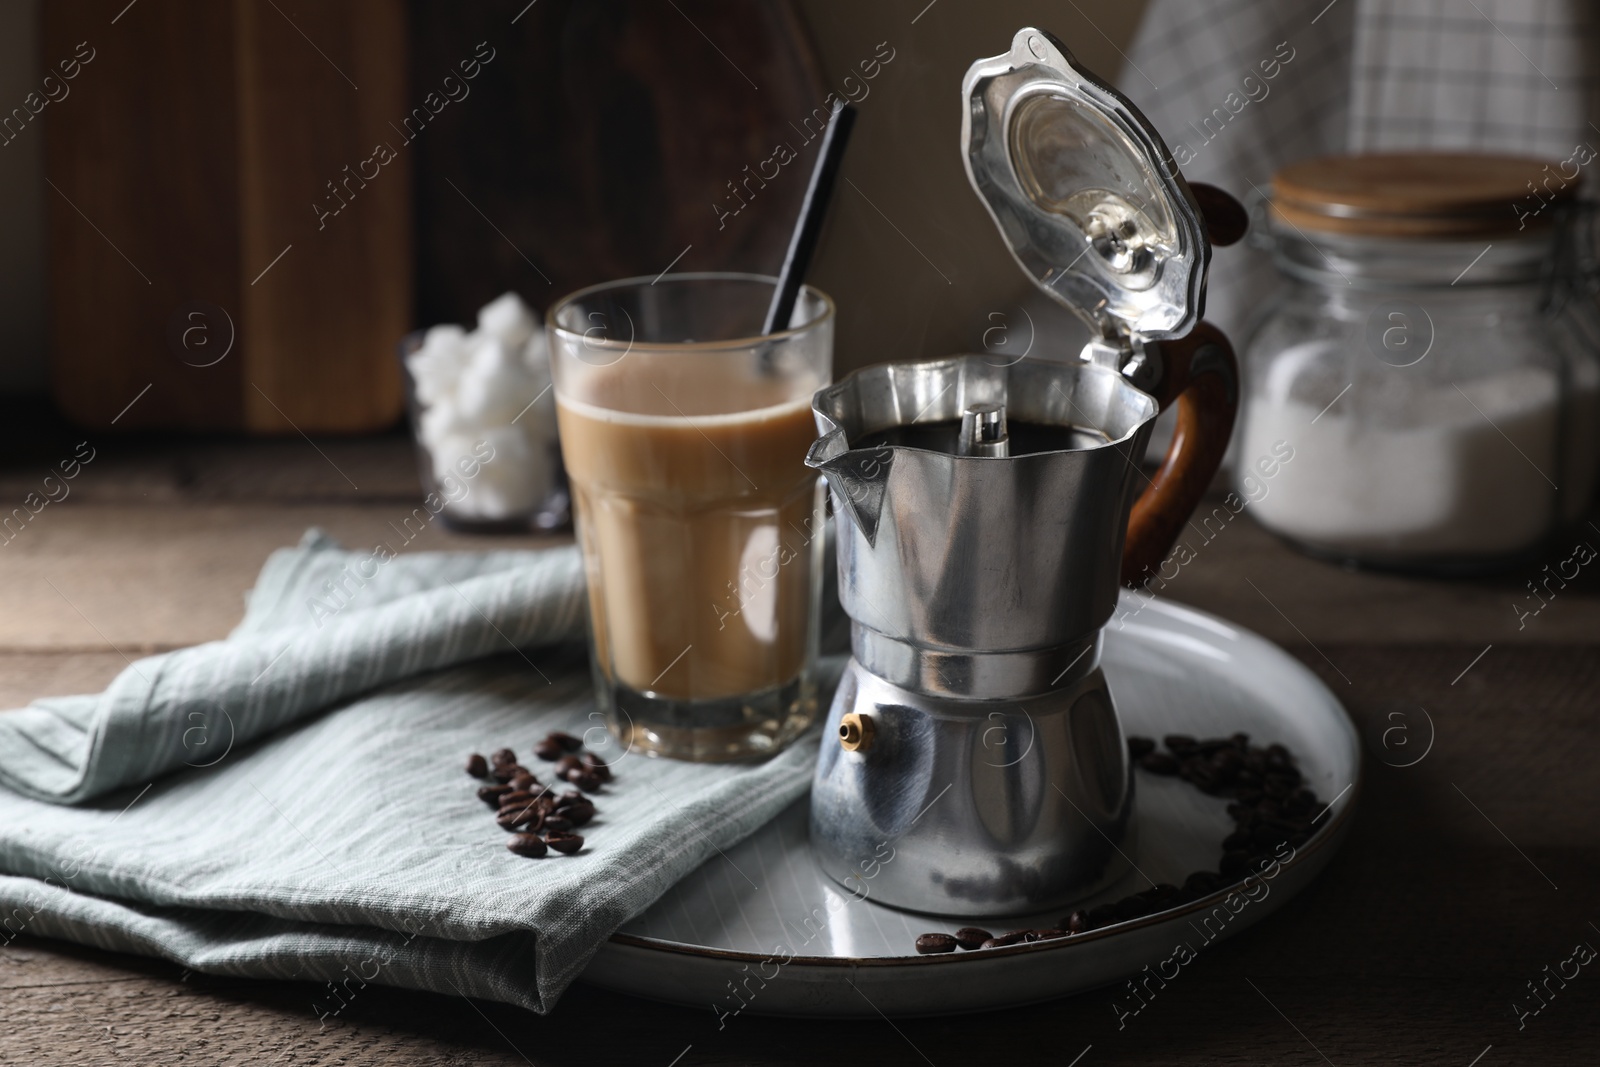 Photo of Brewed coffee in moka pot, glass of drink and beans on wooden table